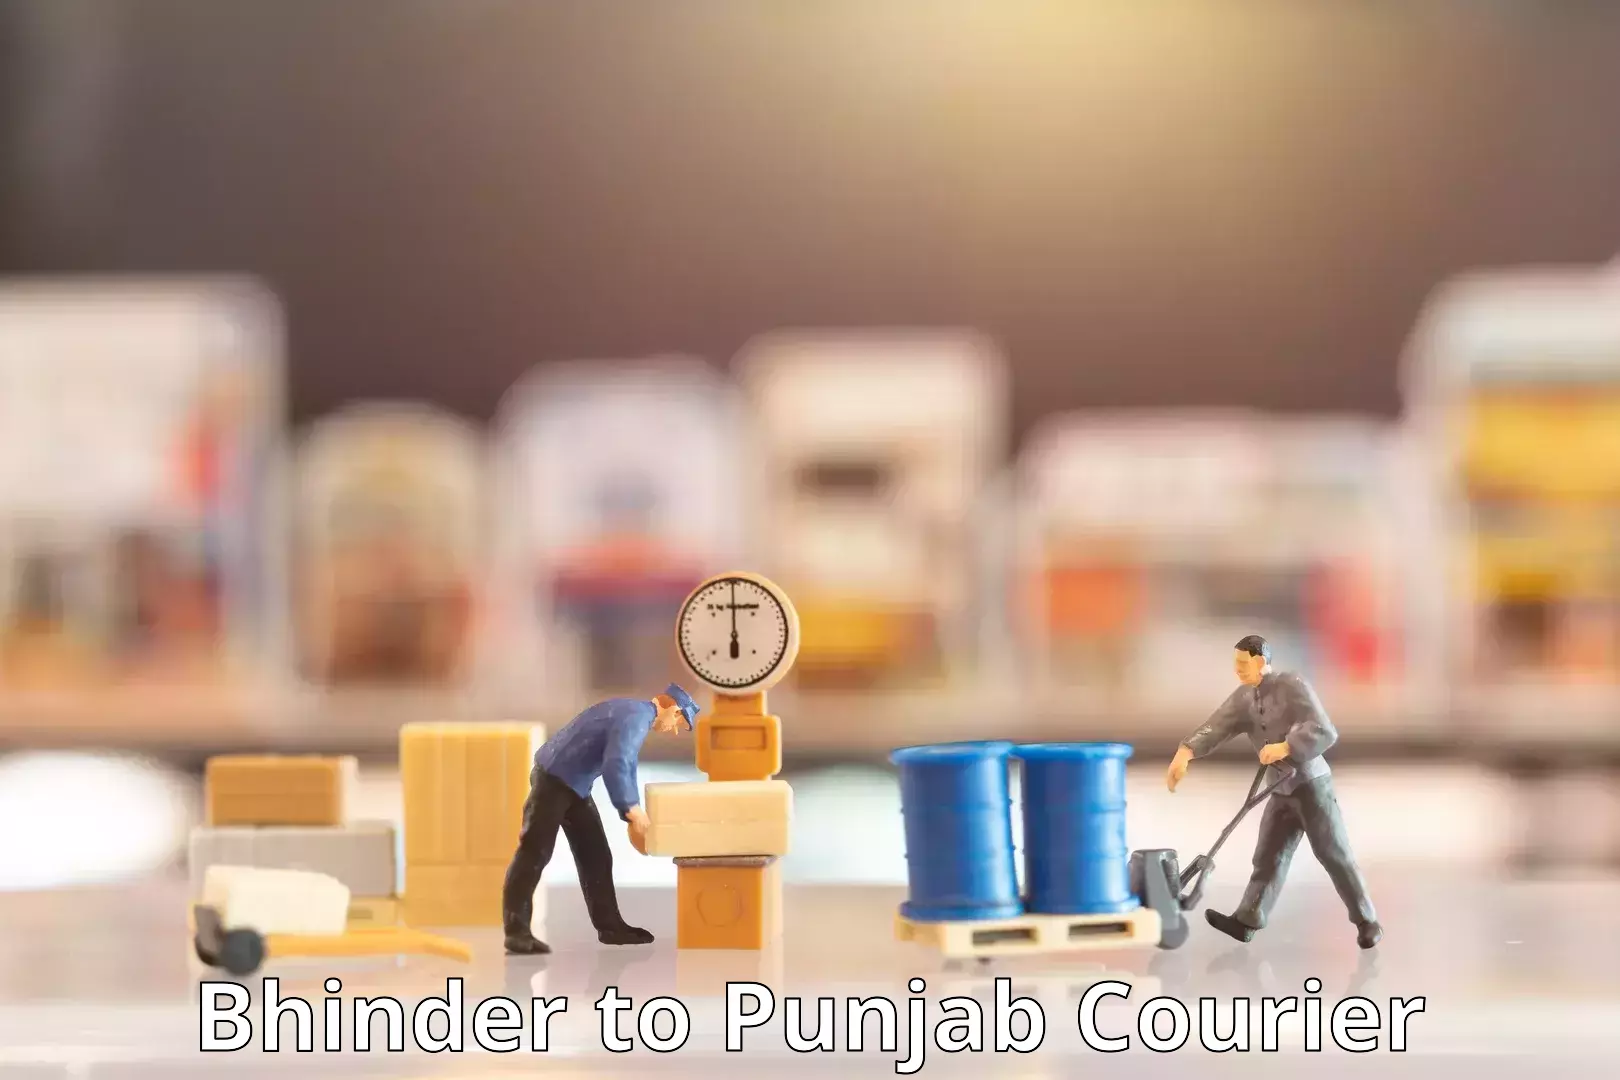 Reliable courier service Bhinder to Punjab